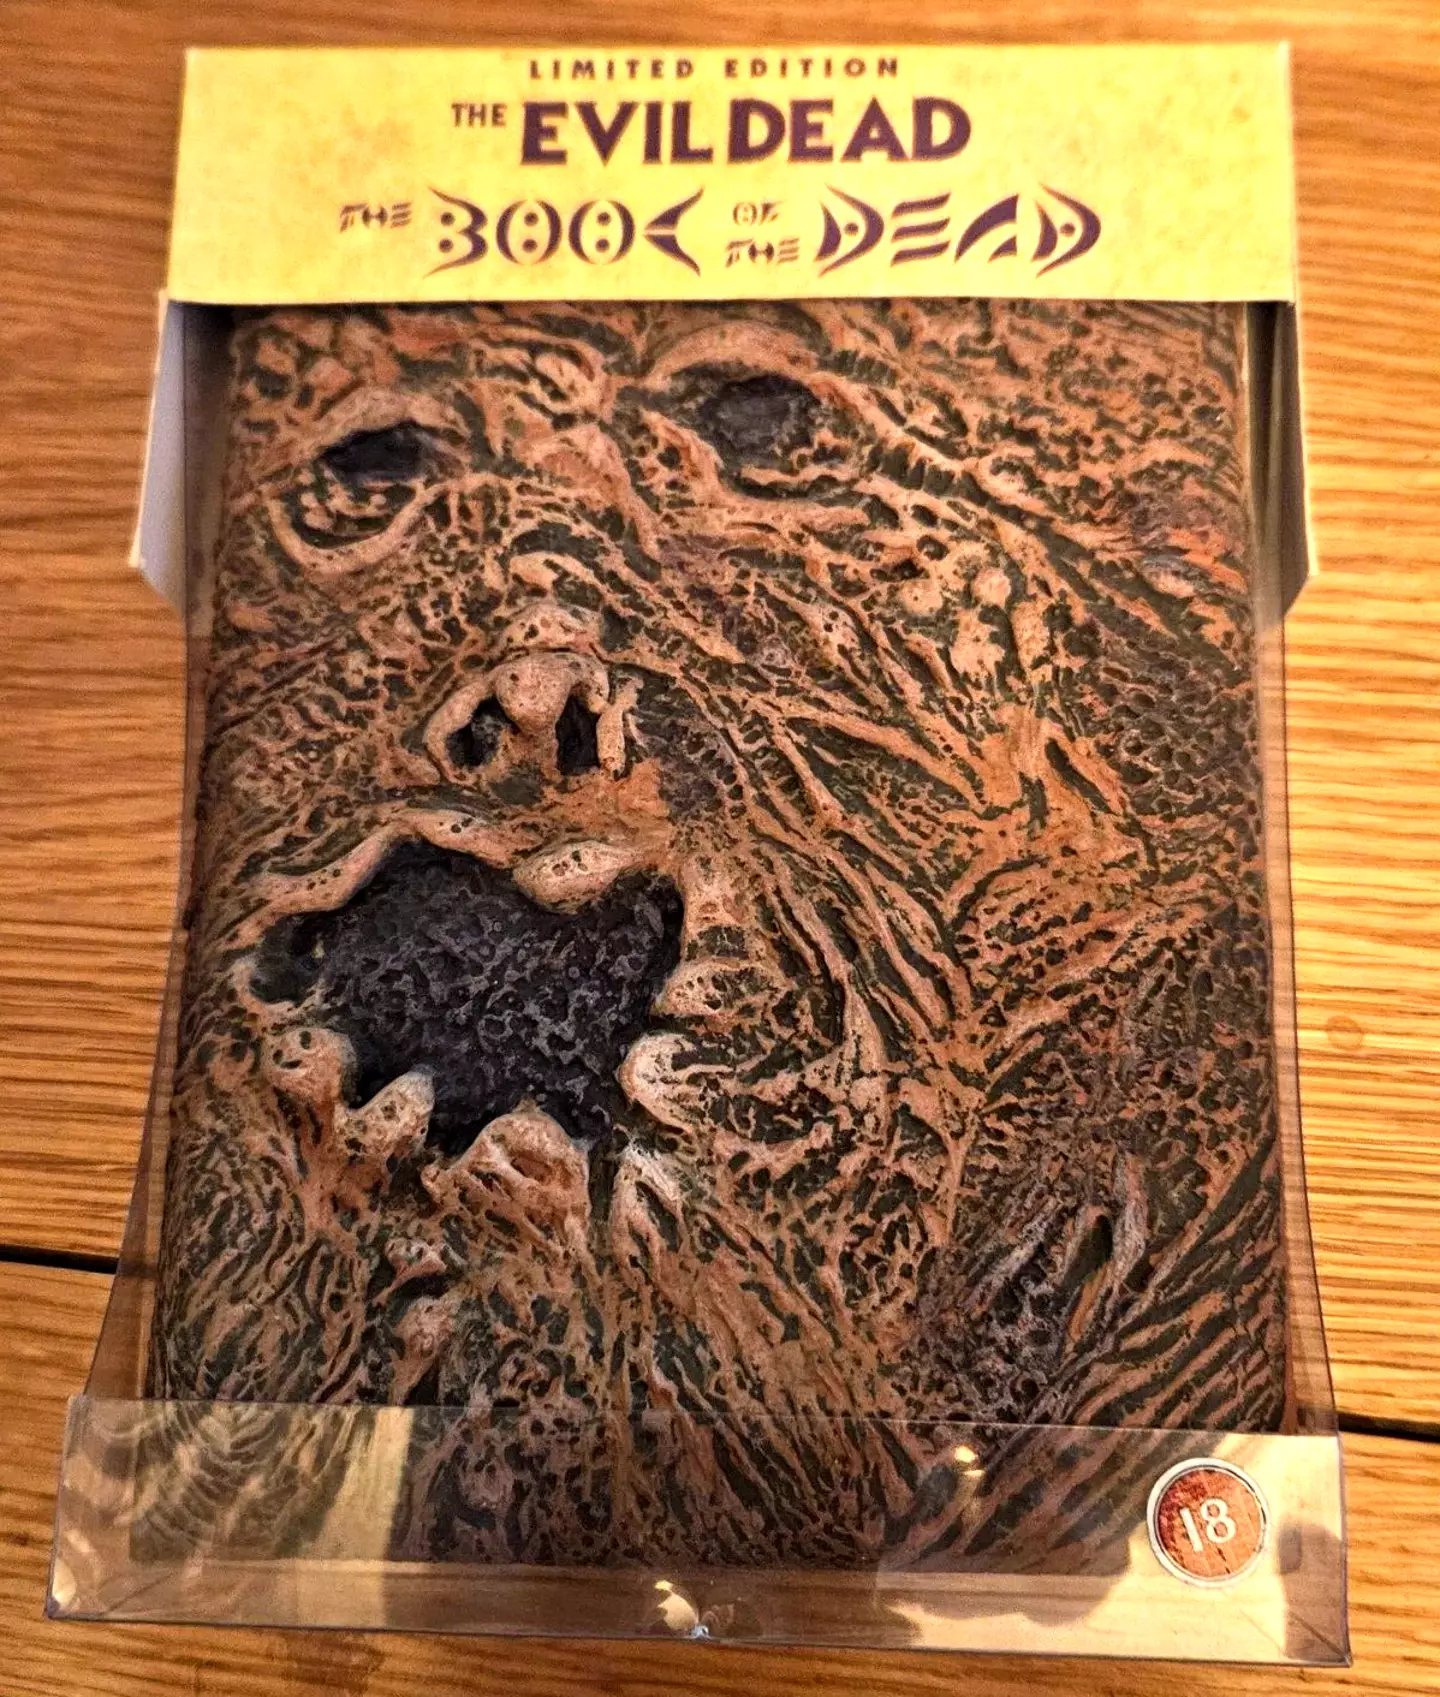 This Evil Dead DVD will earn you a pretty penny.